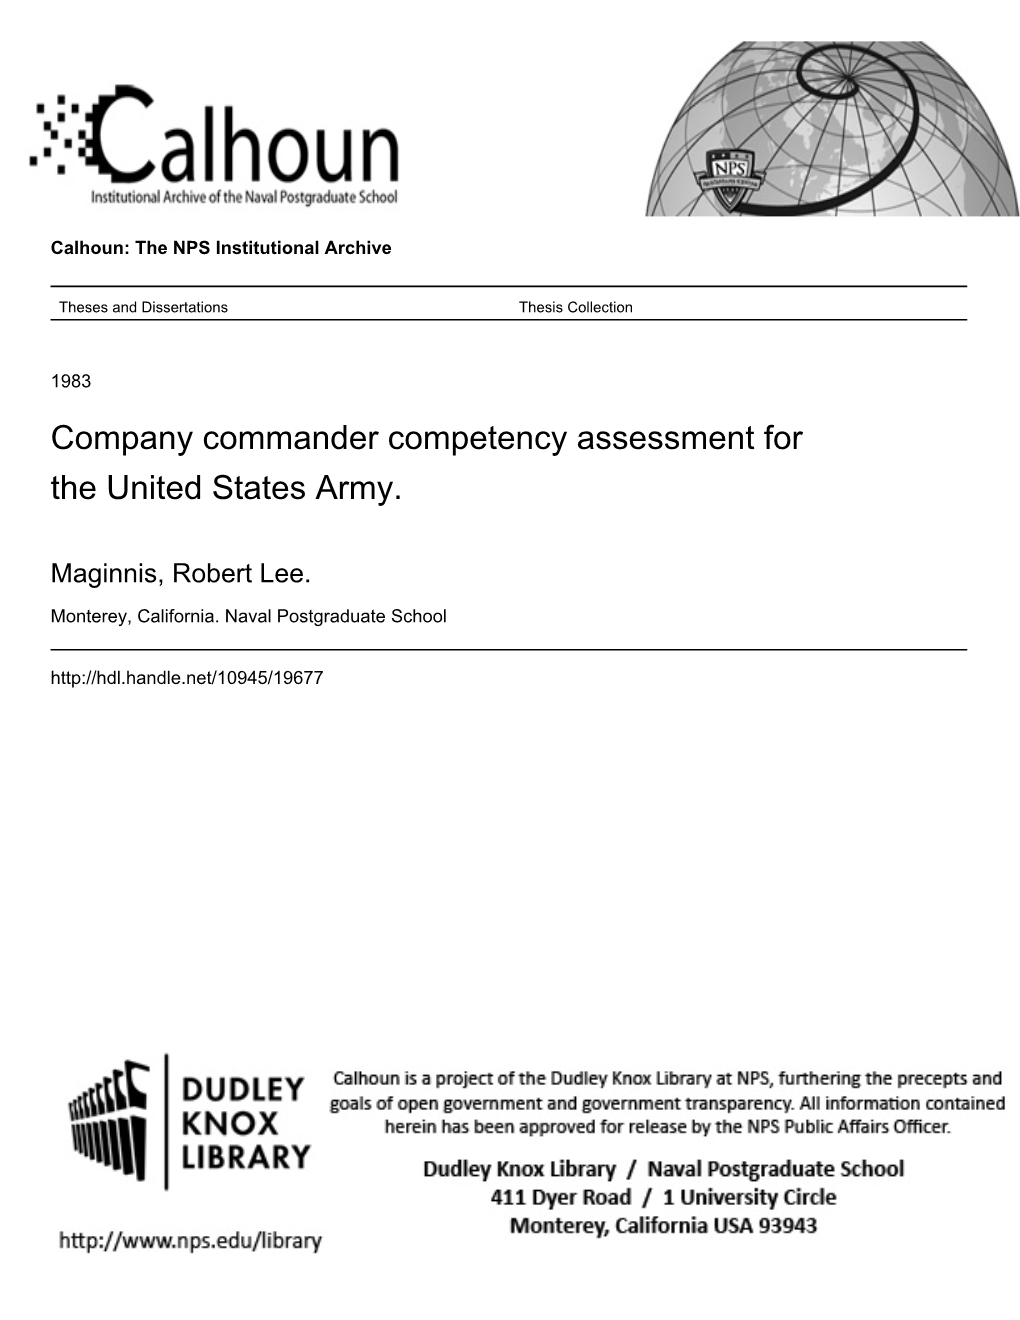 Company Commander Competency Assessment for the United States Army